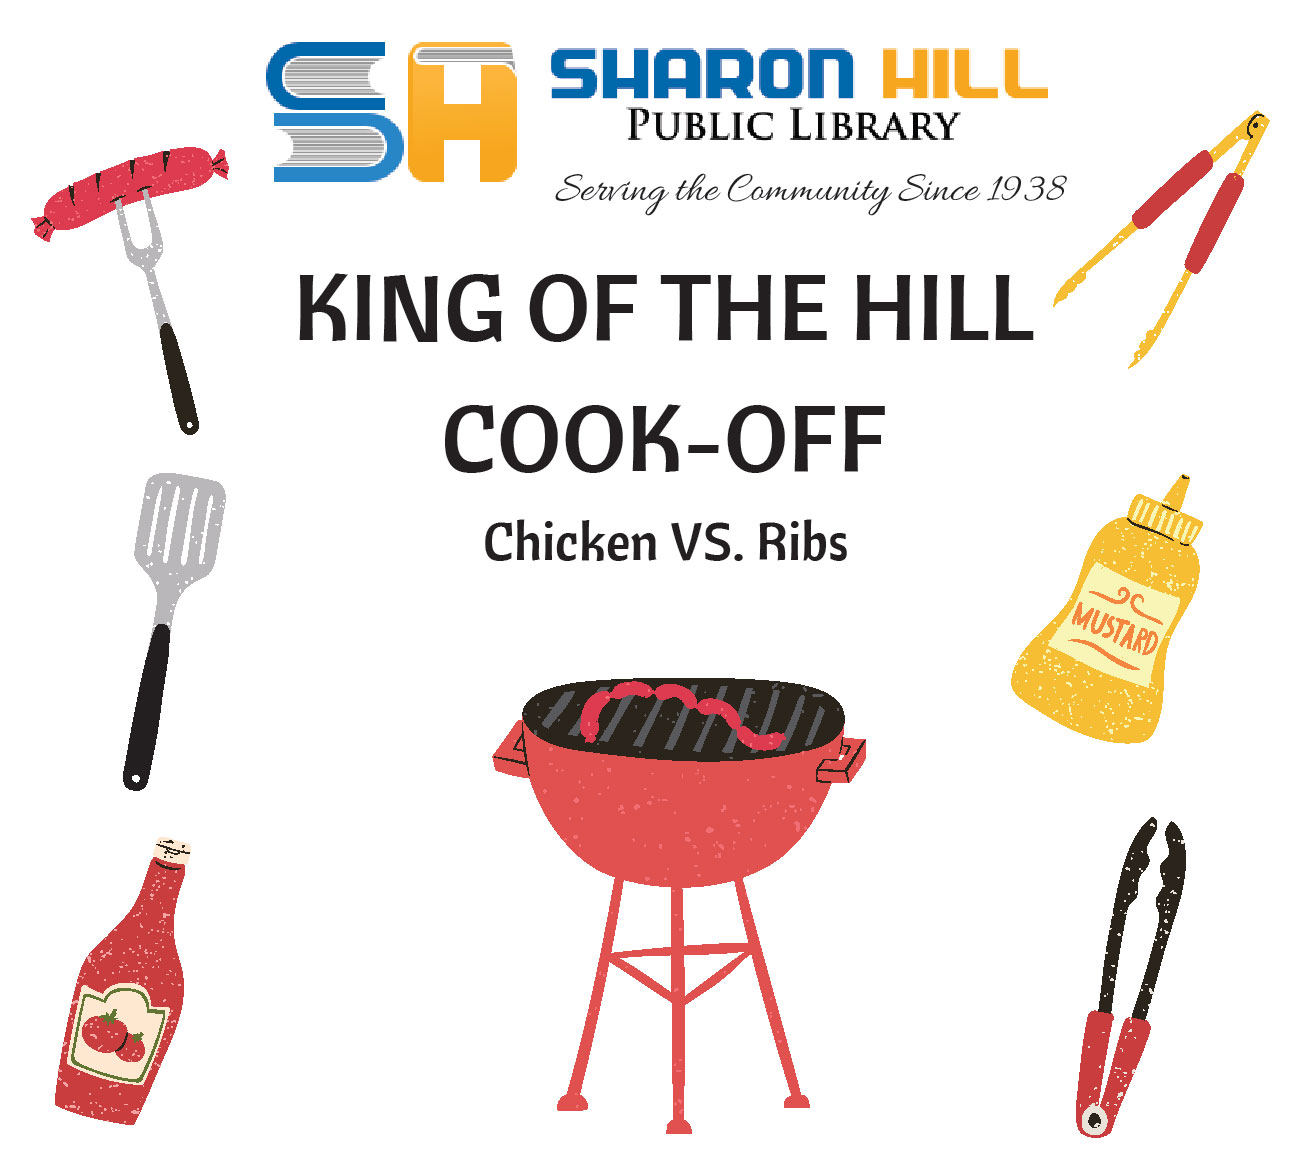 King of the Hill Grill Off